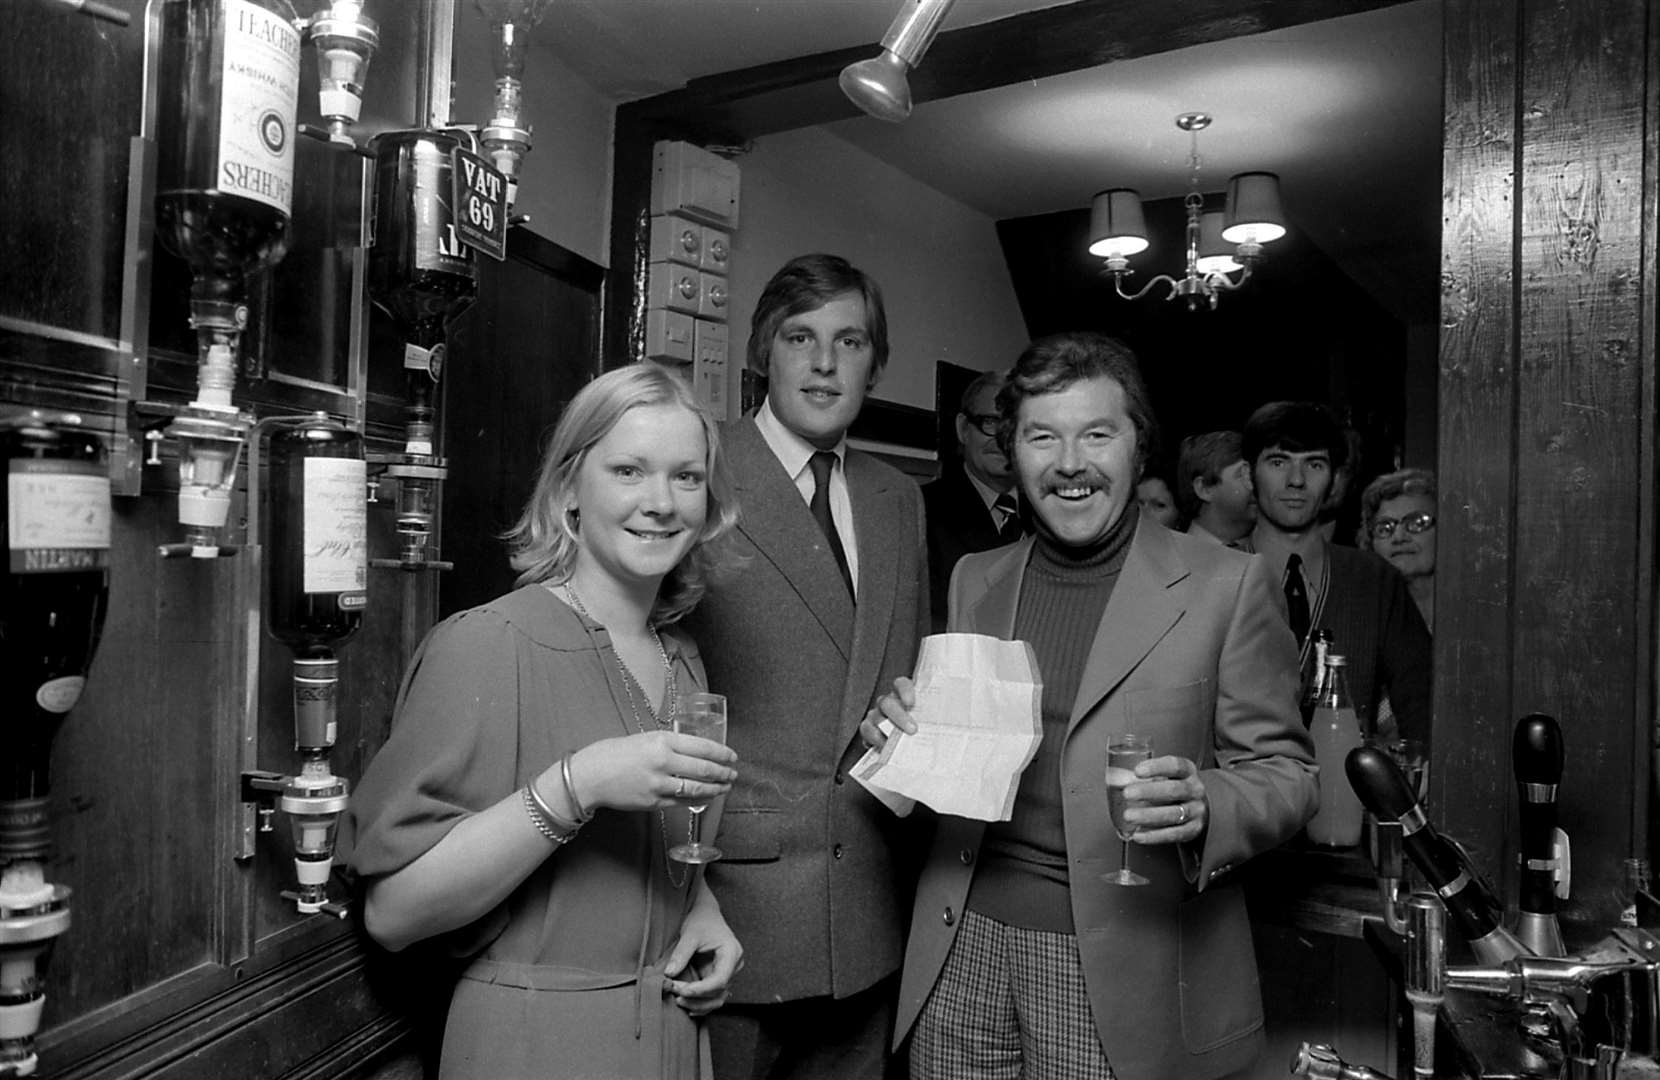 Simon and Maria Taylor with a telegram from Muhammad Ali's at the Miller's Arms in Canterbury in 1977, which they had renovated and reopened. The boxer was a a friend of Maria’s father, boxing promoter Mike Barrett, and the telegram read: “Please give your daughter, Maria, and husband, Simon, my best wishes and I wish them great success at the Miller’s Arms and hope it becomes The Greatest. The best of luck from The Greatest, Muhammad Ali.”